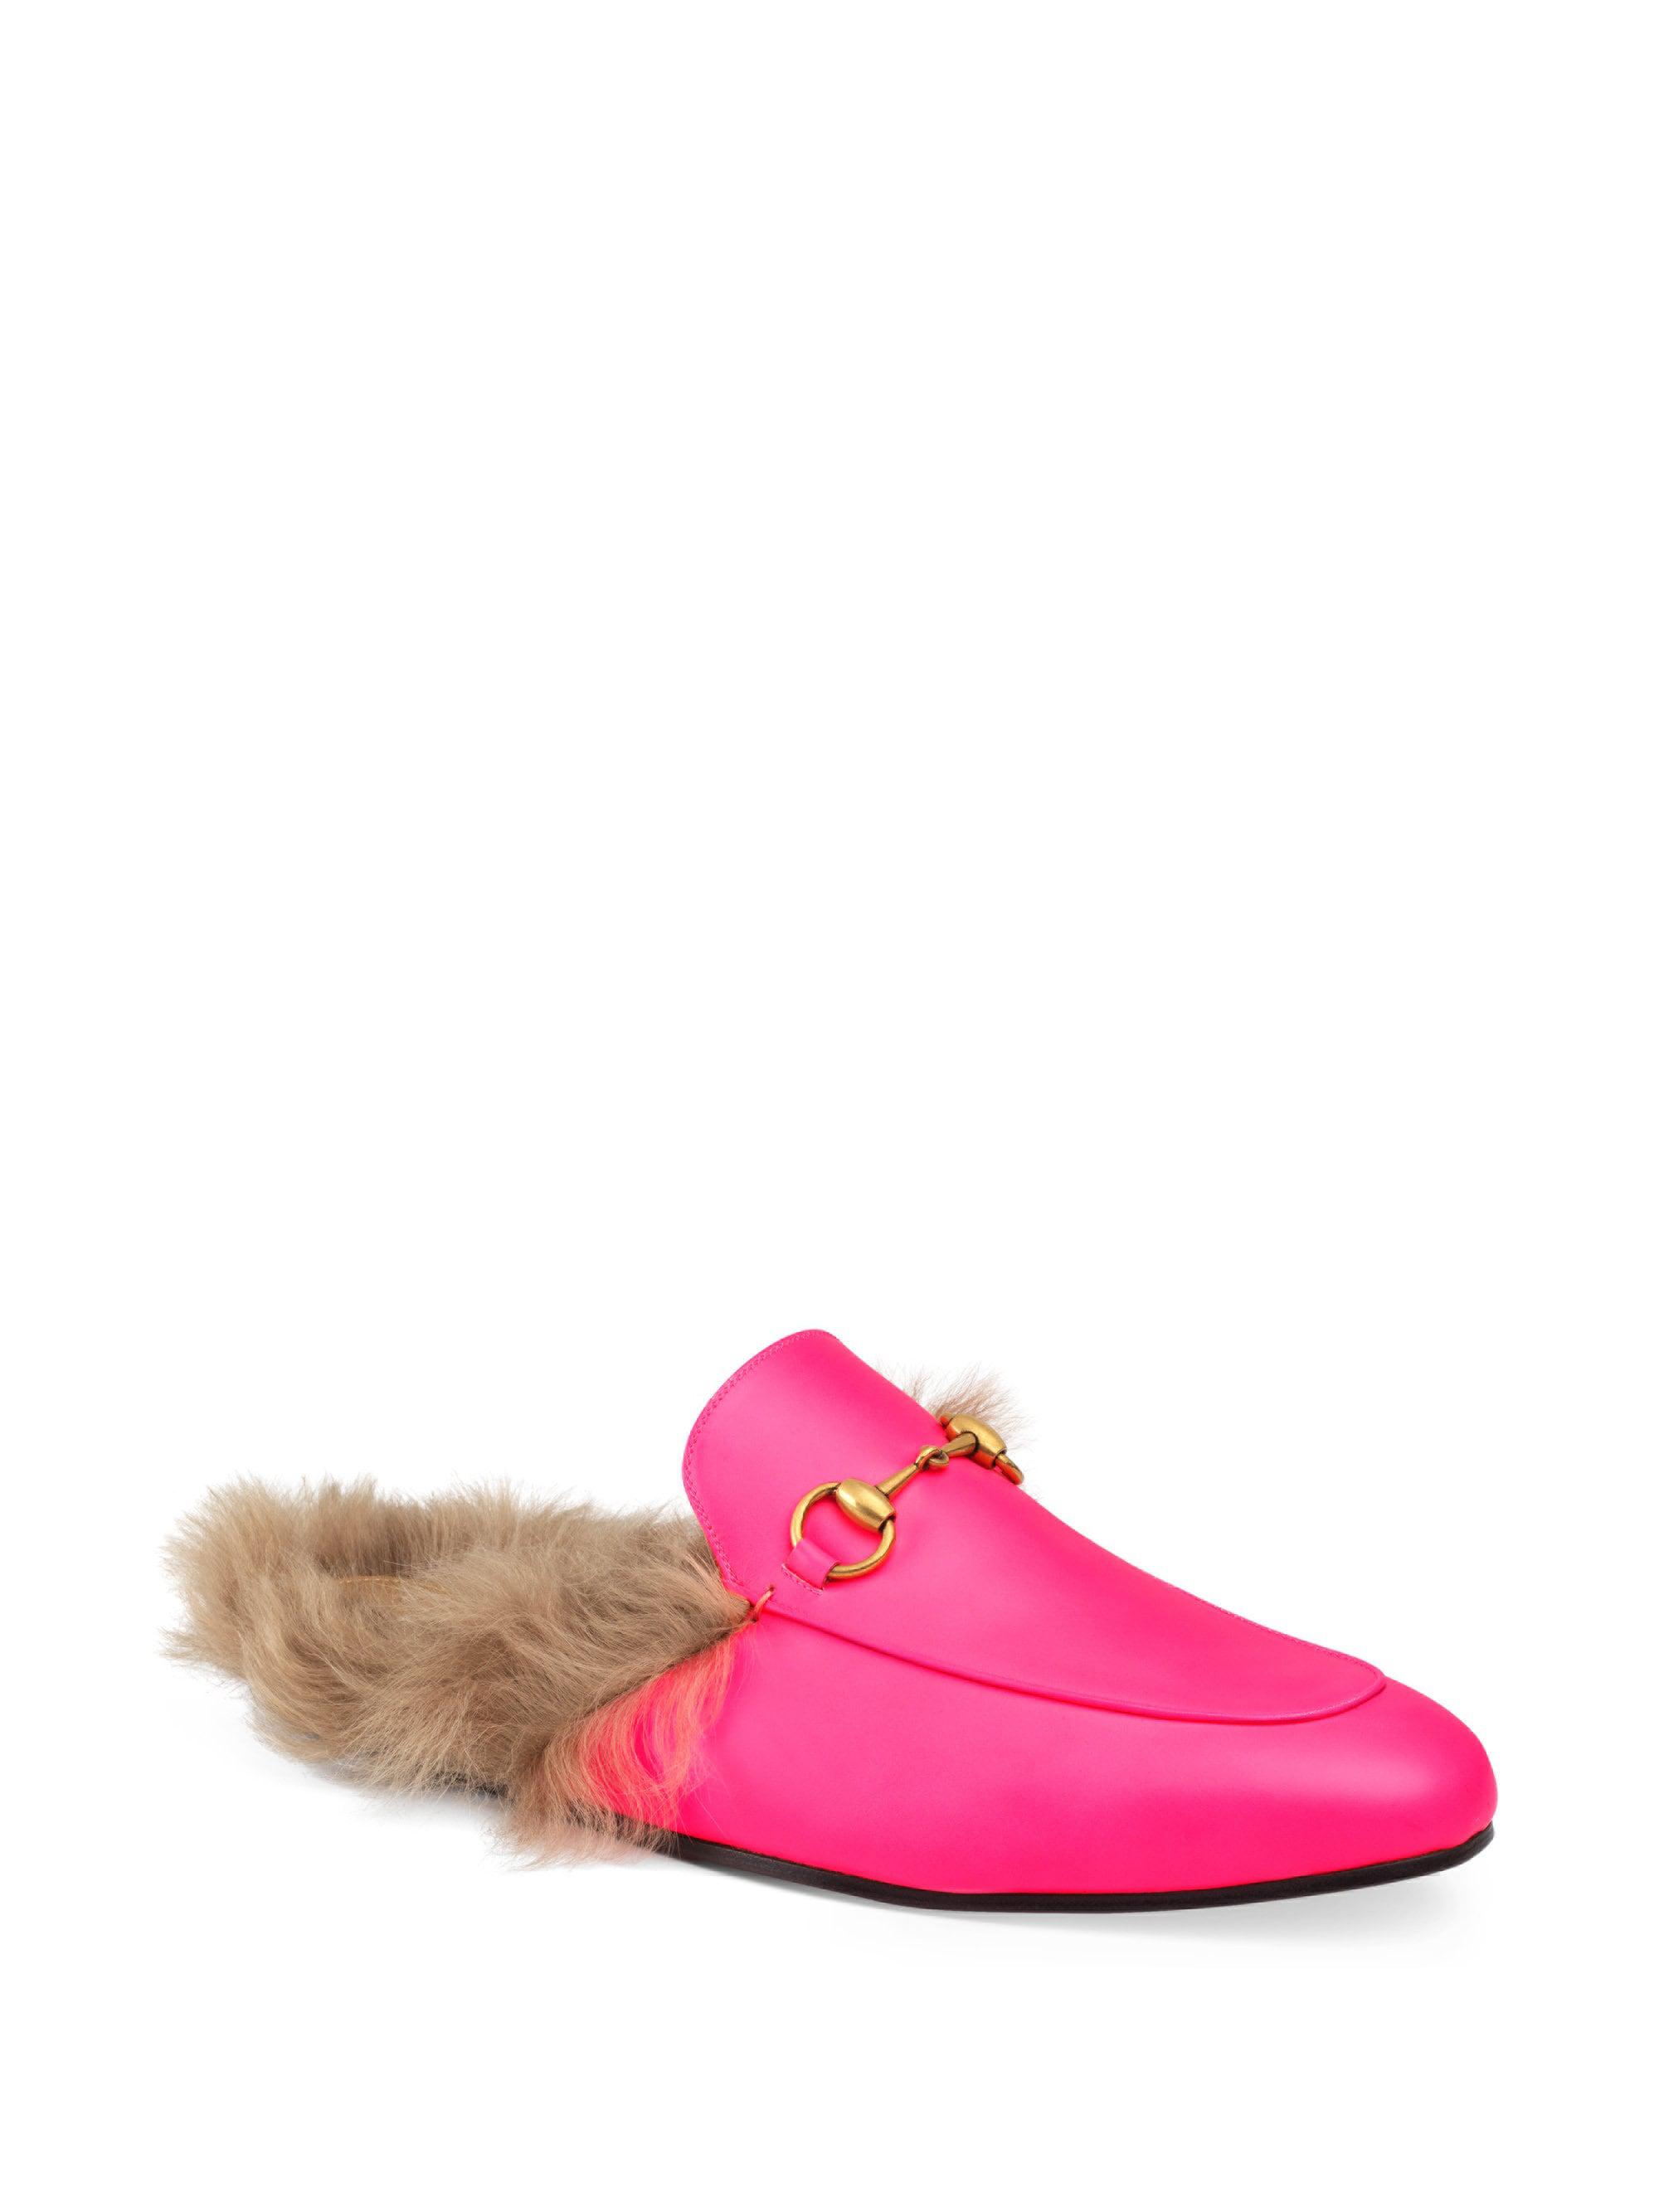 Gucci Pink Fluorescent Princetown Loafers for Men - Save 40% - Lyst